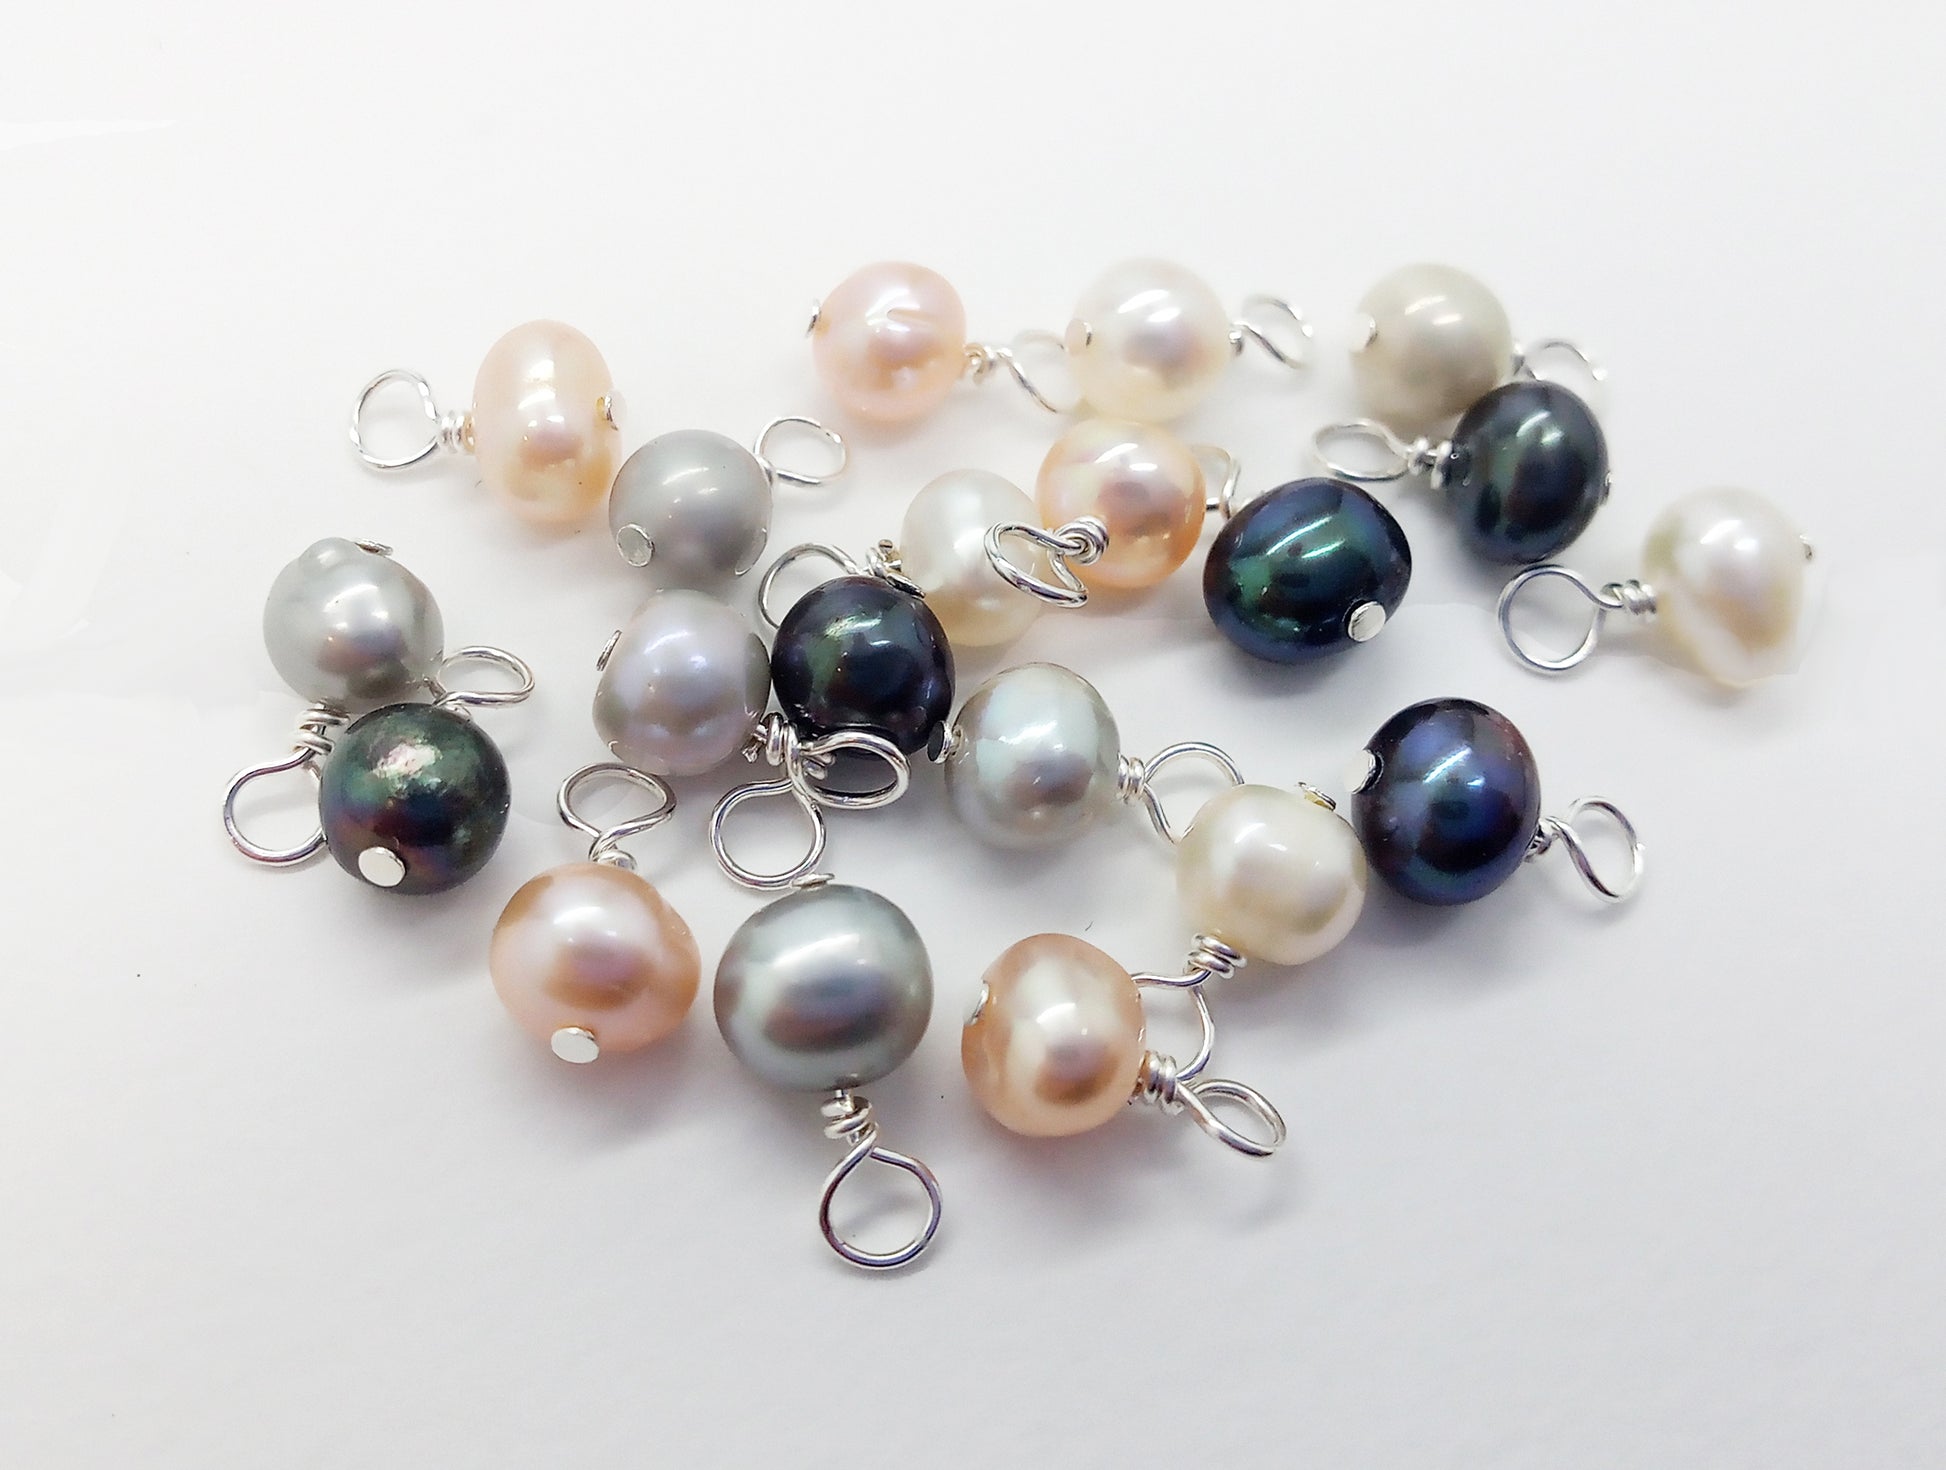 Tiny Colored Pearl Charms, 5mm - 6mm Freshwater Pearls in White, Peach, Gray and Black - Adorabilities Charms & Trinkets